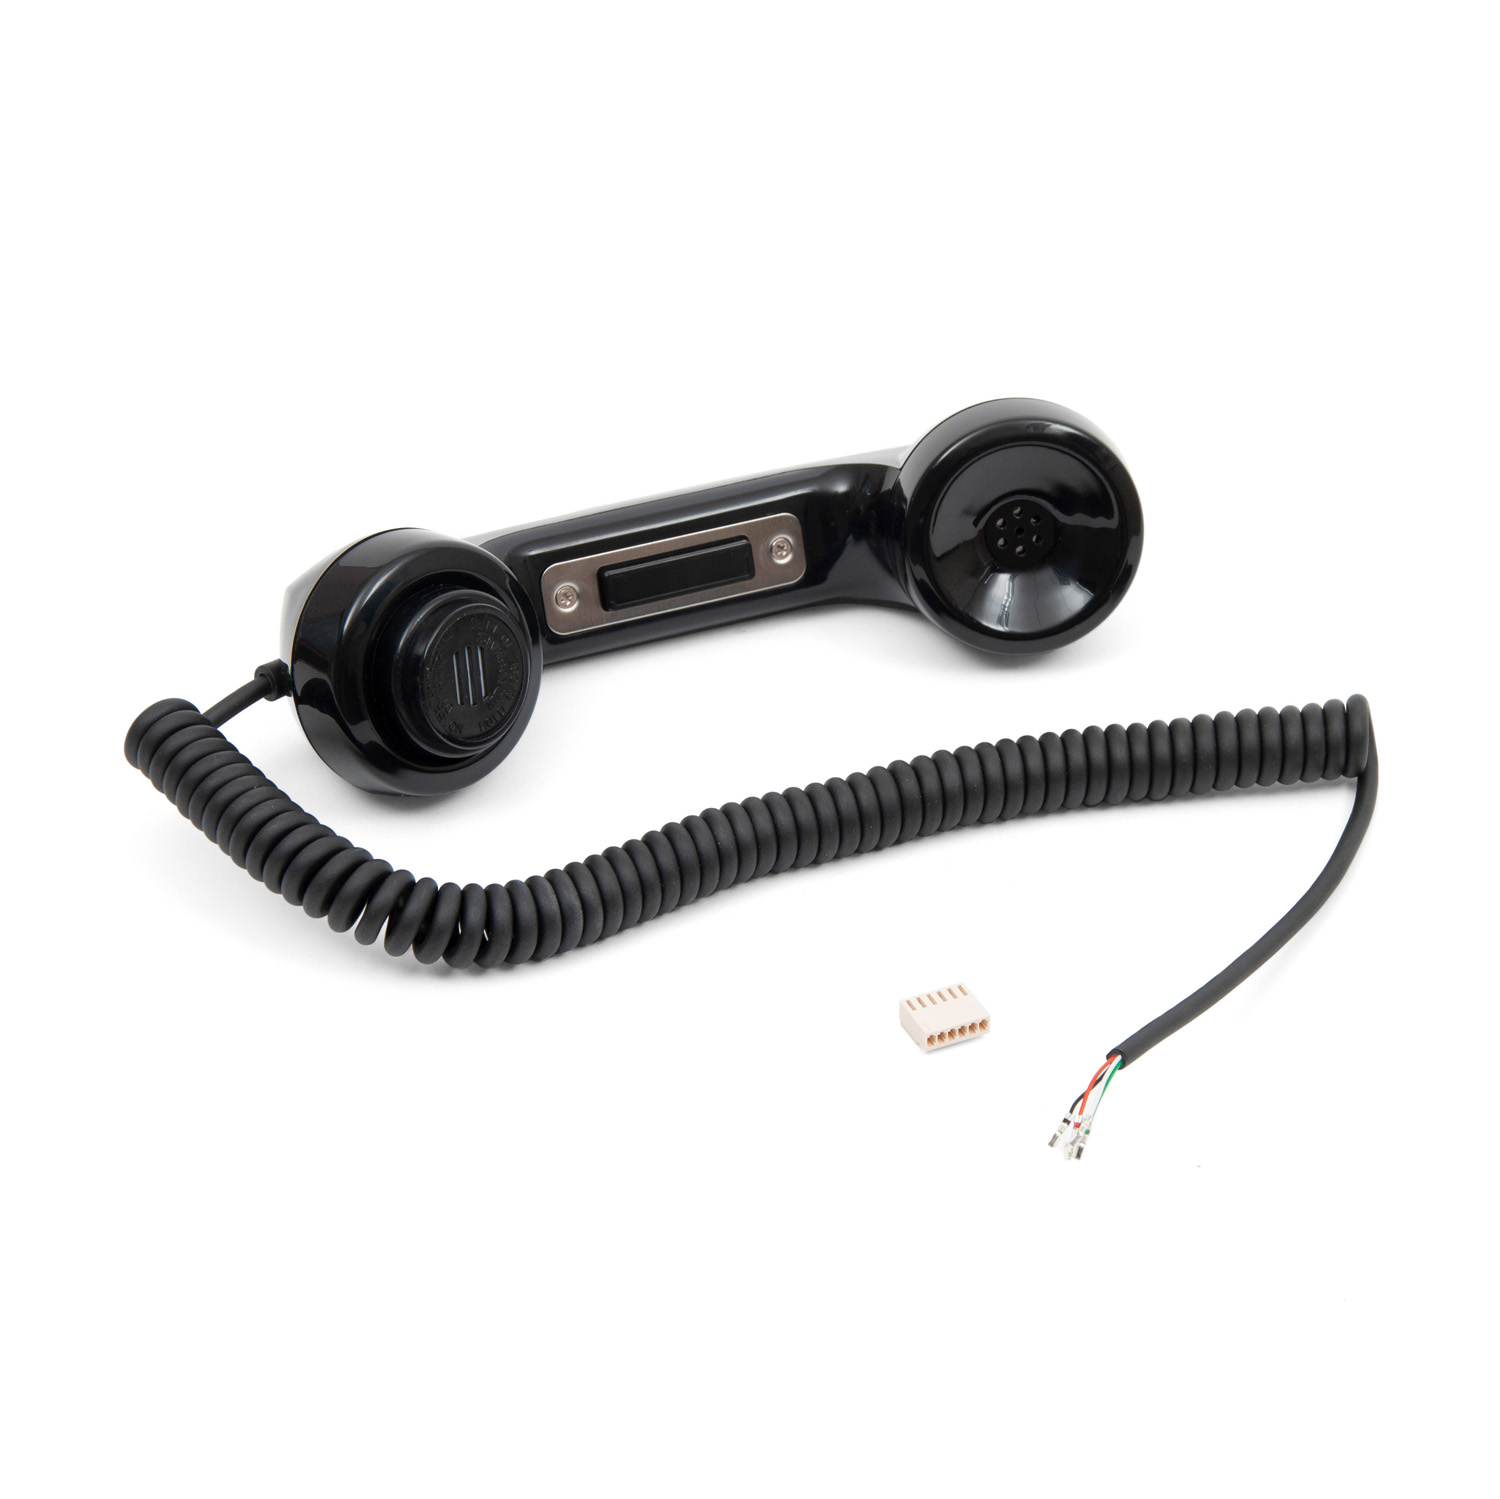 3006090324 66A1940 Handset complete with cord NC mic for VSP223